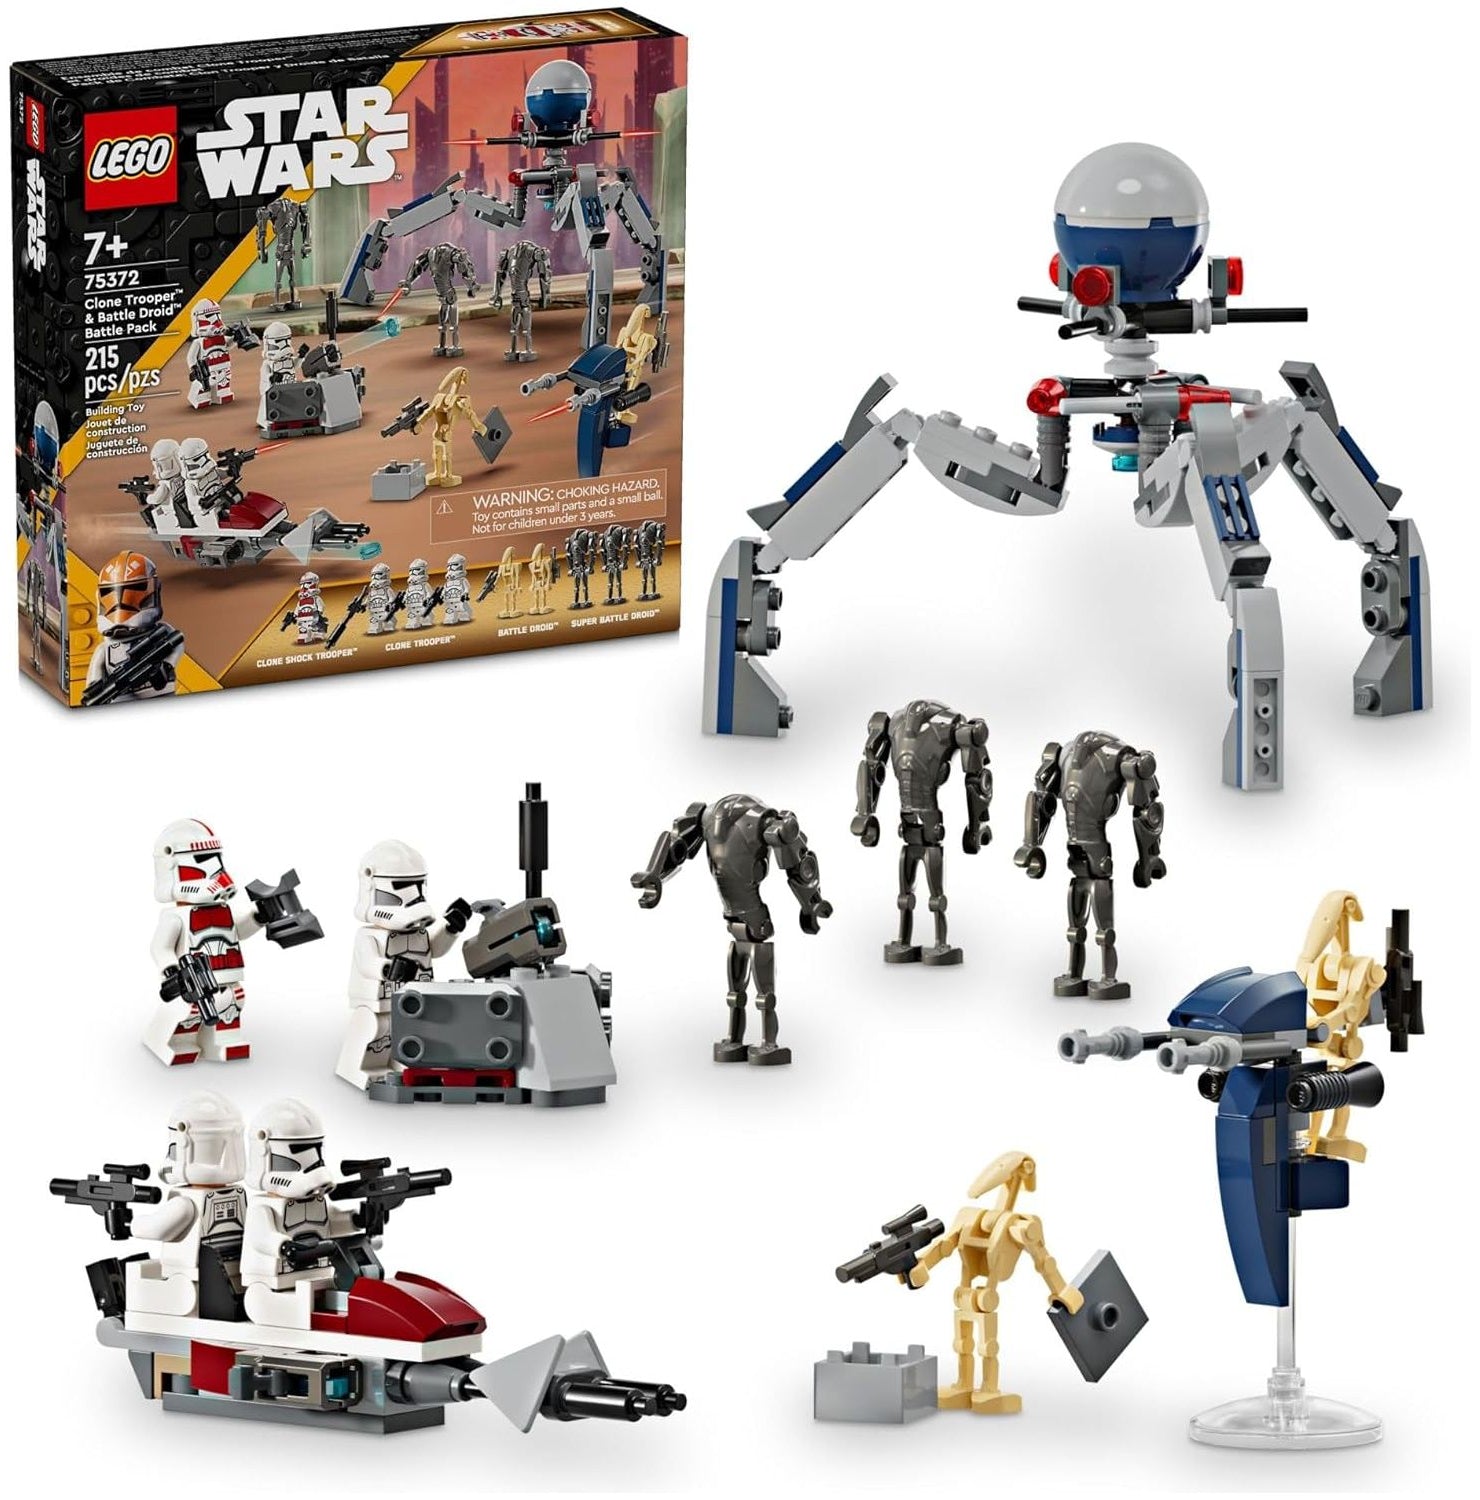 LEGO 75372 Star Wars Clone Trooper & Battle Droid Battle Pack Set for Kids, Buildable Toy Speeder Bike Vehicle, Tri-Droid and Defensive Post.